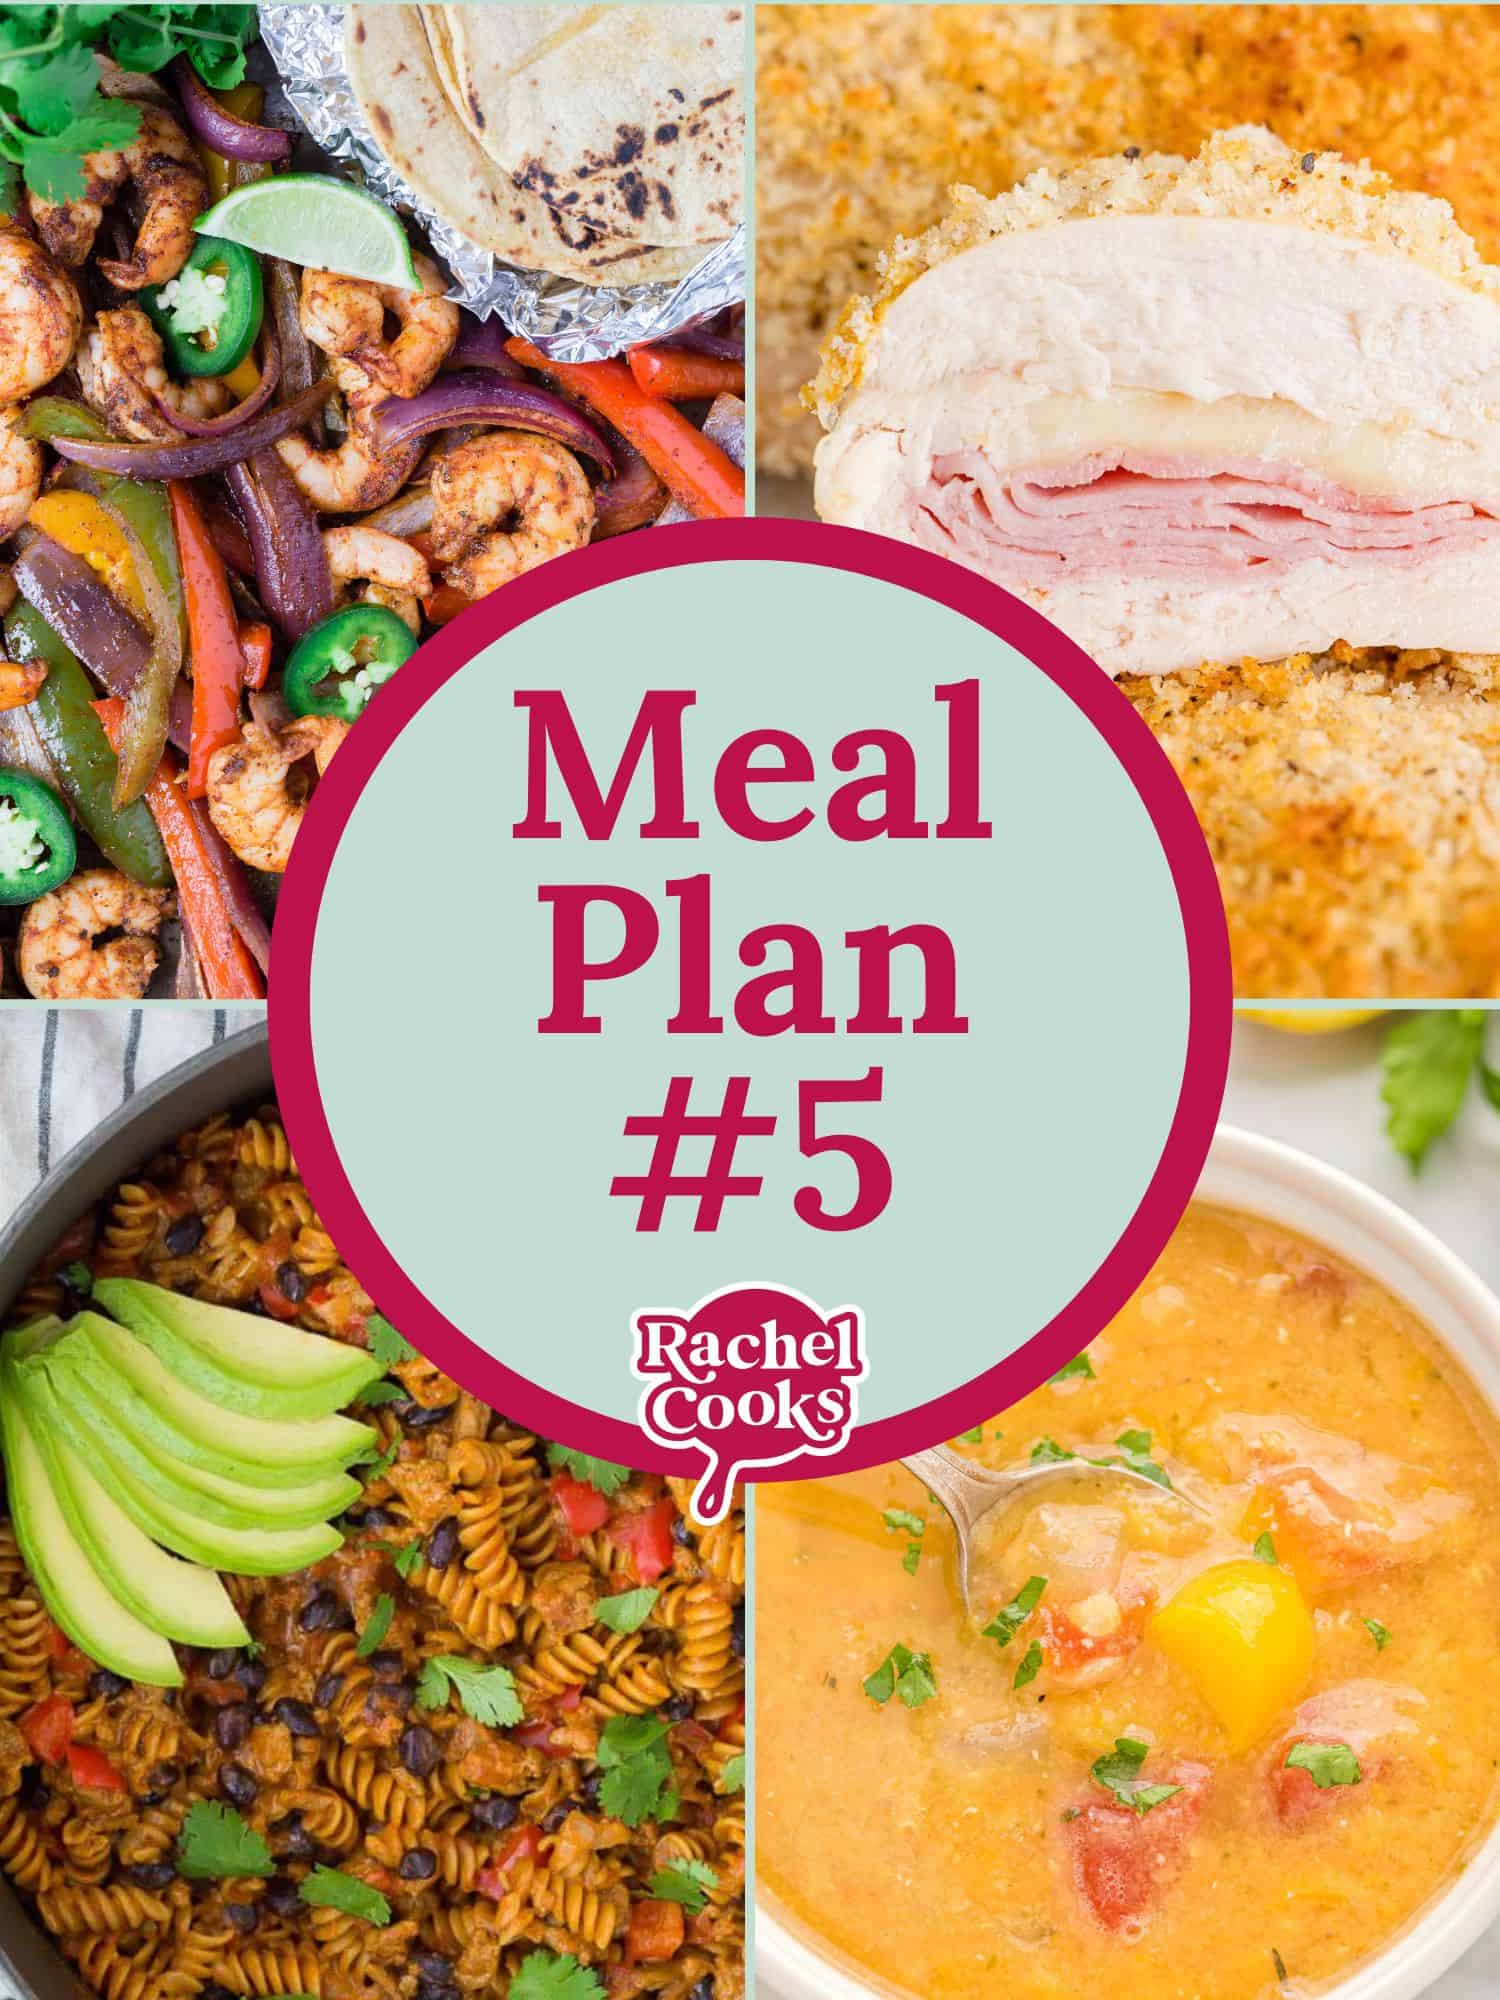 Four meals, text overlay reads "meal plan #5."